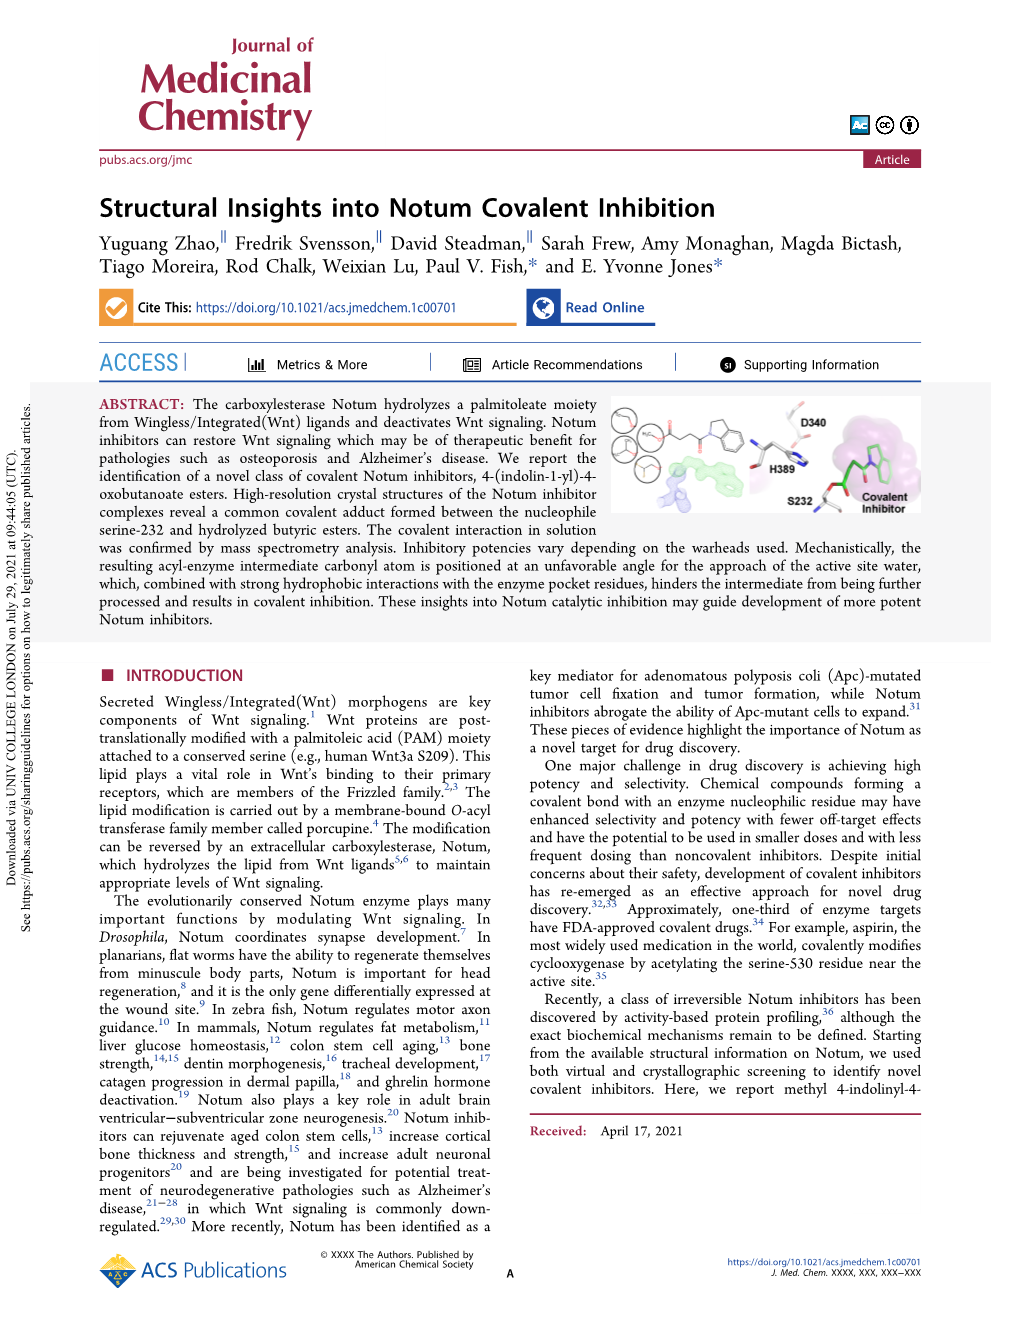 Structural Insights Into Notum Covalent Inhibition